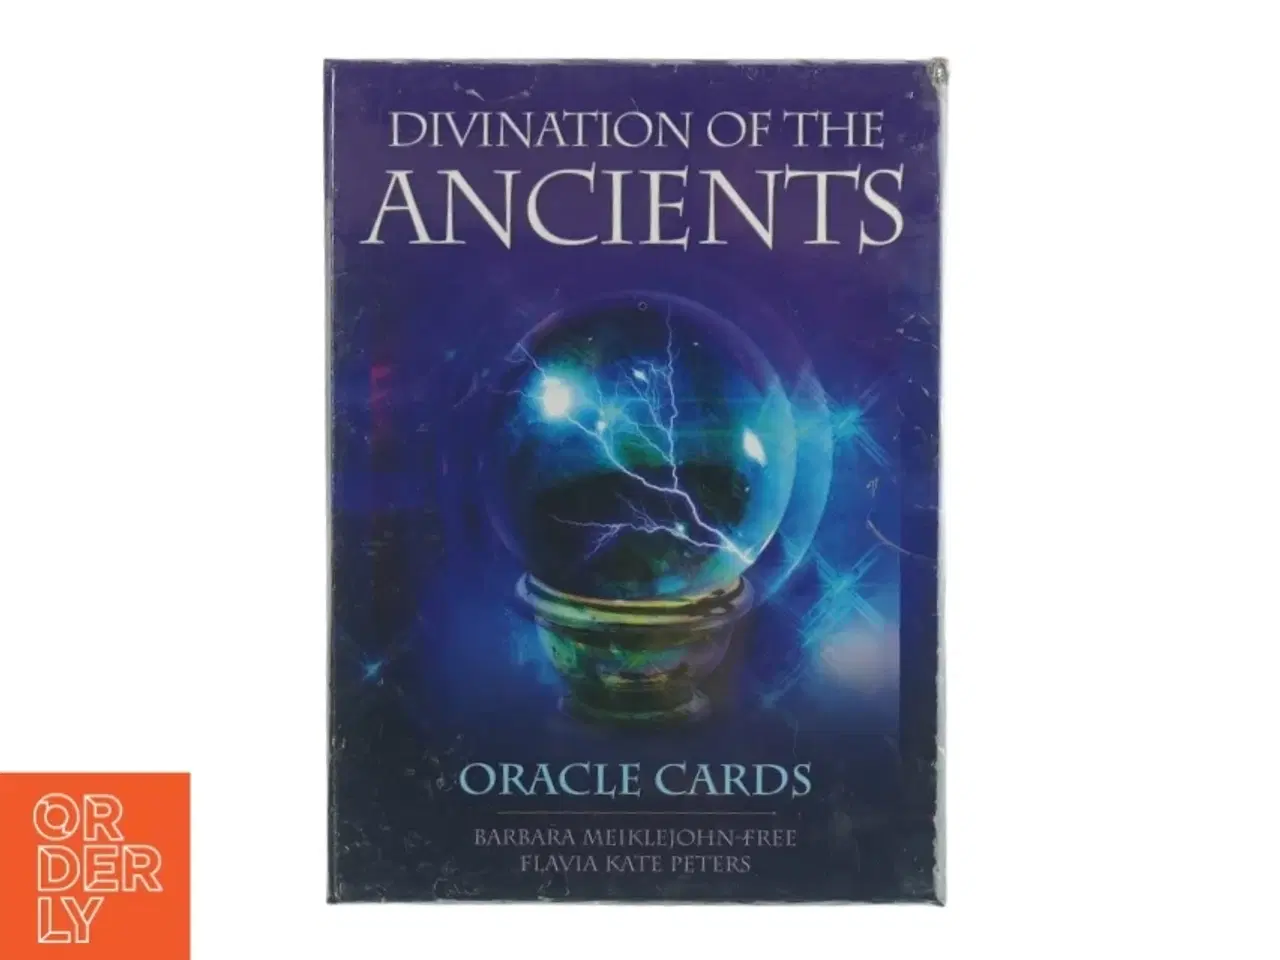 Billede 1 - Divination of the Ancients oracle cards